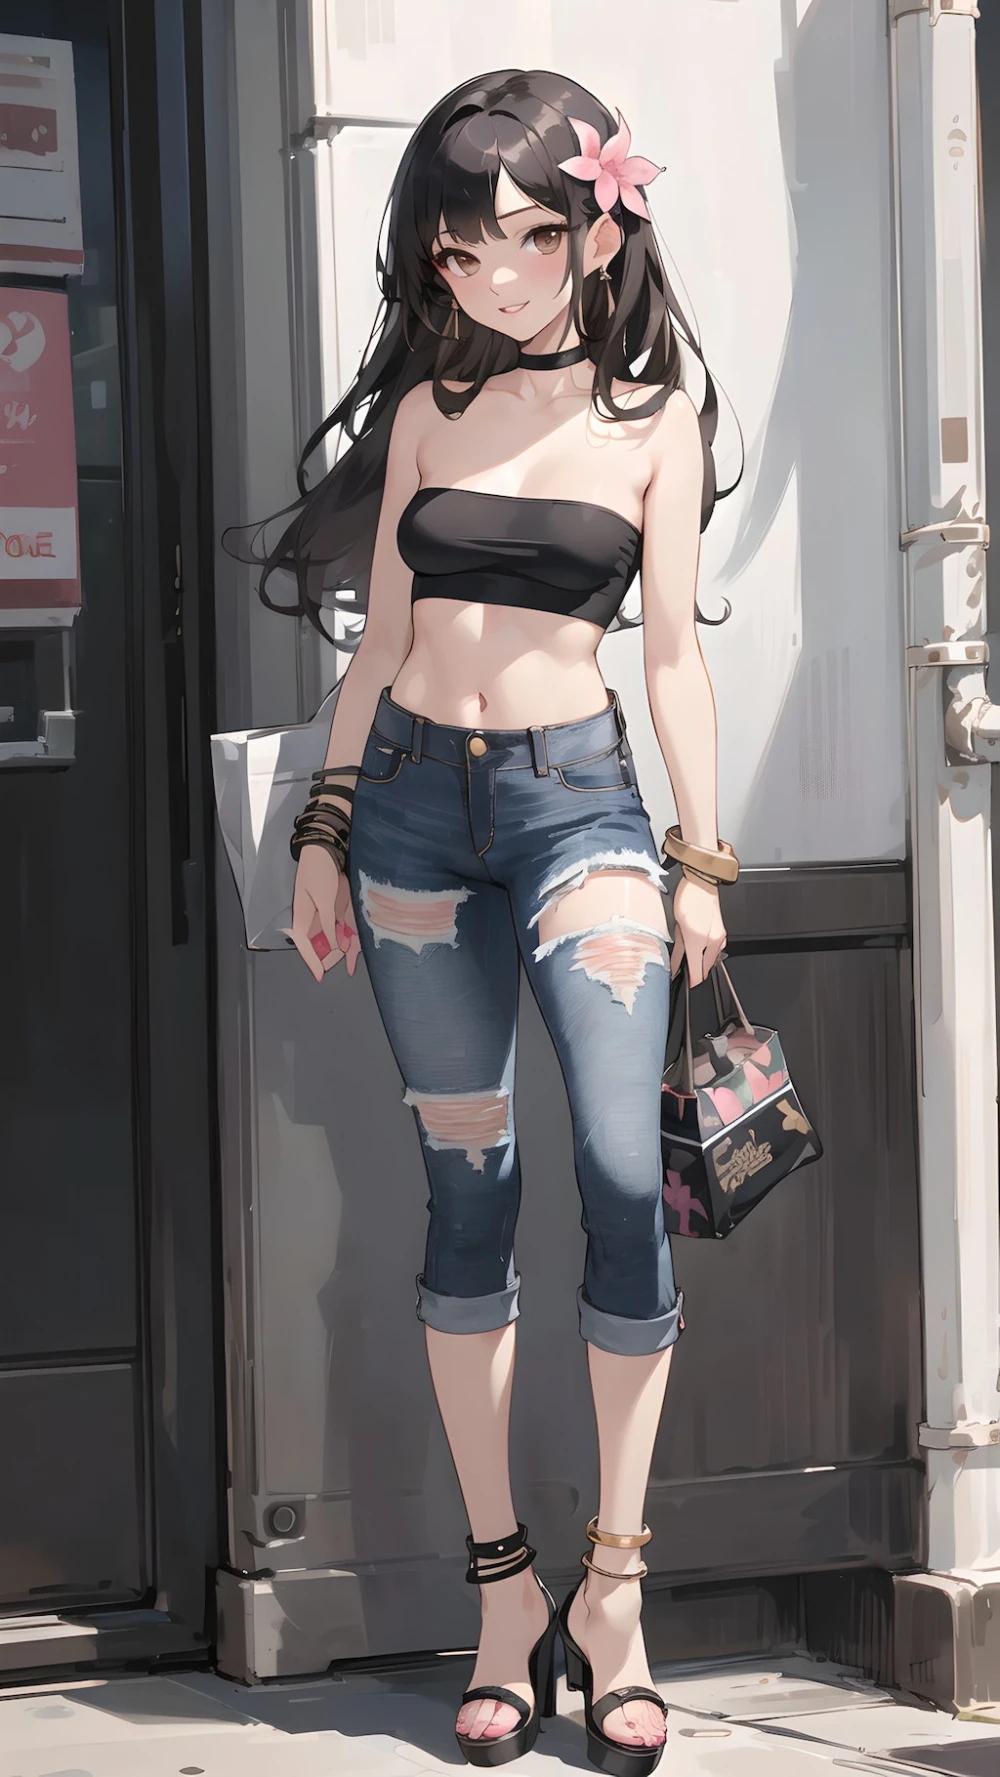 midriff-anime-style-all-ages-17